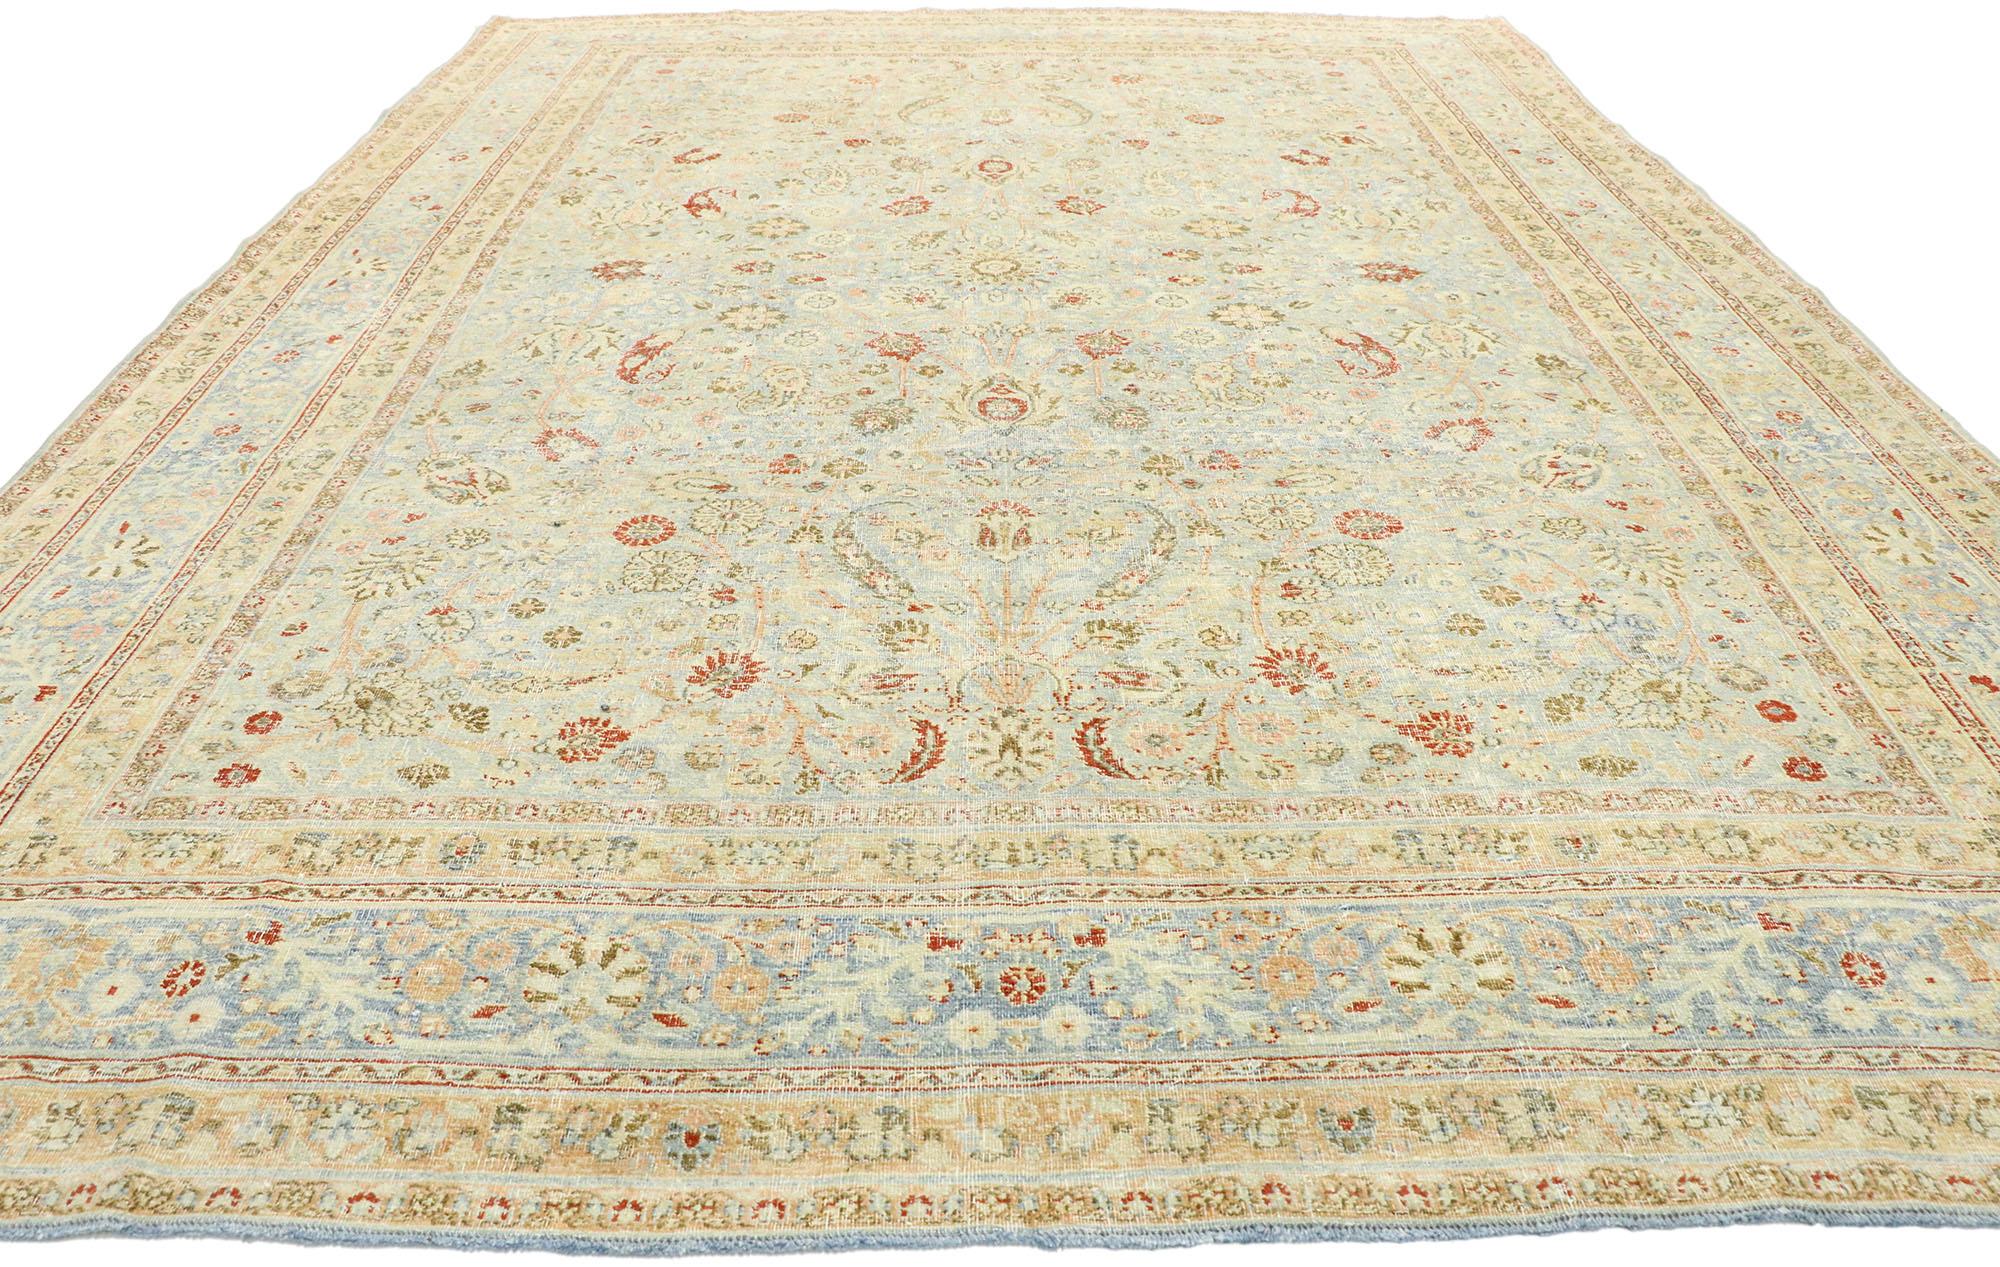 Hand-Knotted Distressed Antique Persian Khorassan Rug with Rustic English Manor Style For Sale